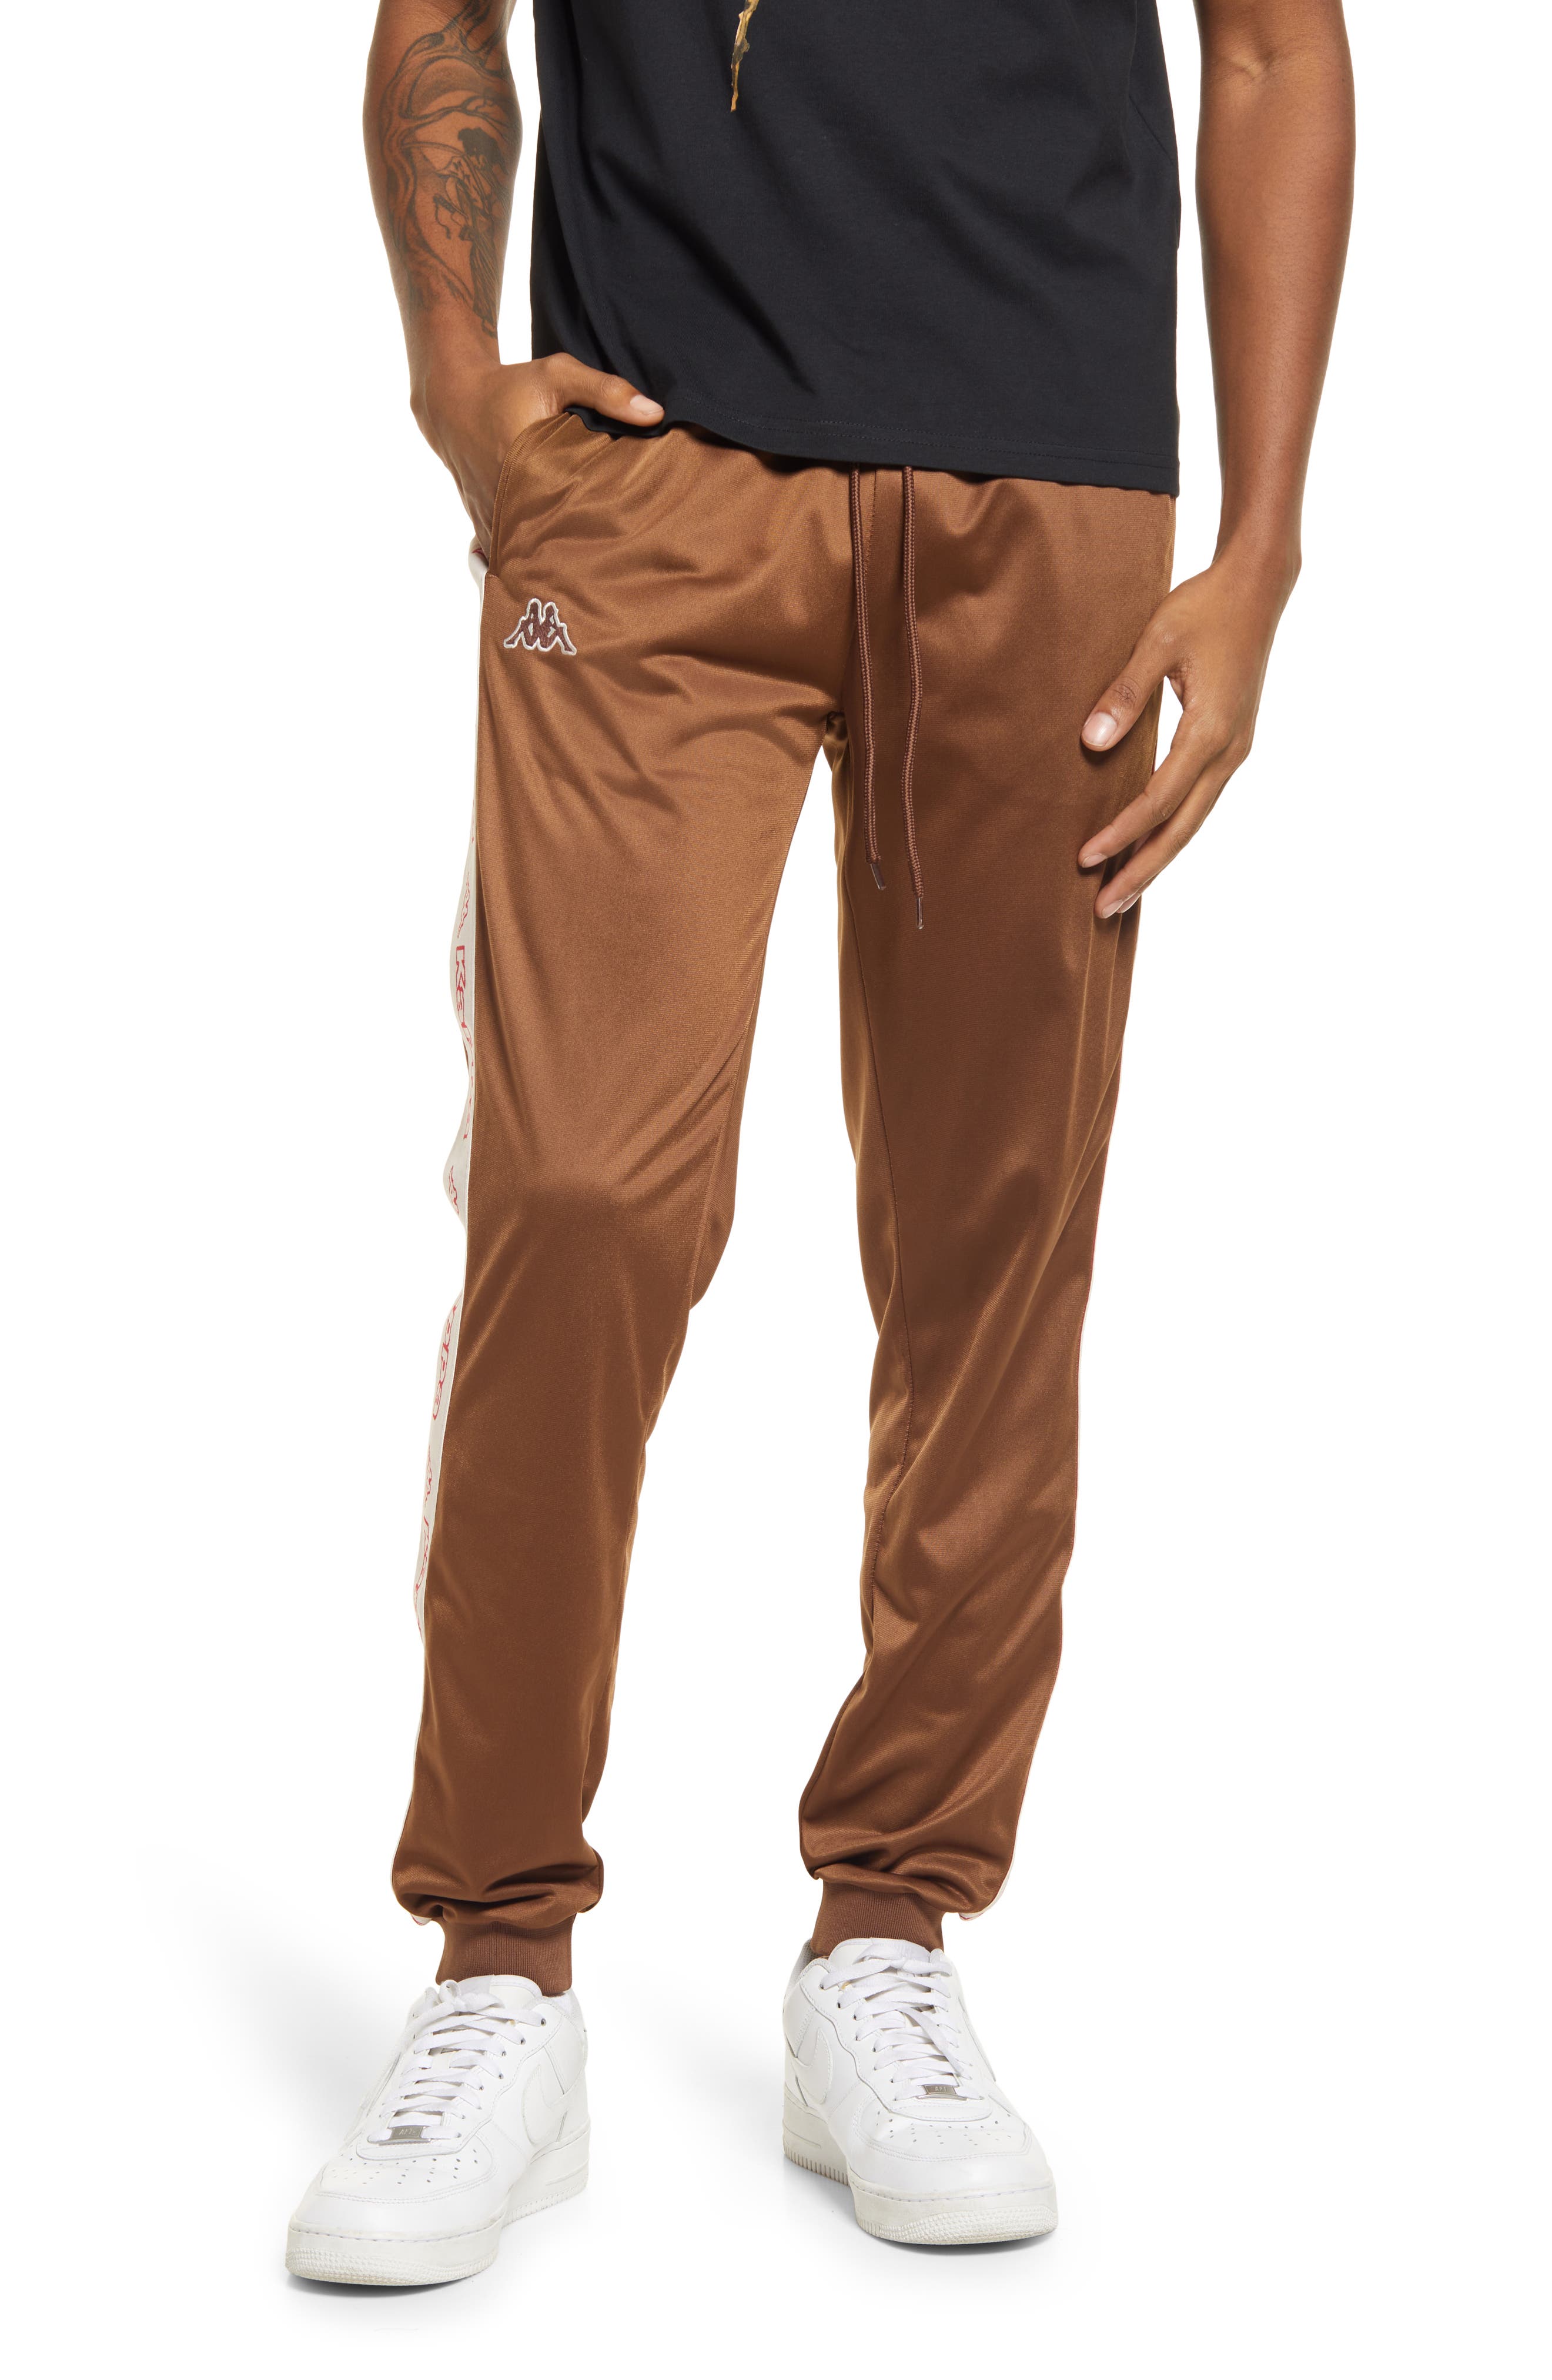 Kappa Men's Alic Logo Tape Joggers in Brown-Pink-Red Cherry at Nordstrom, Size Small